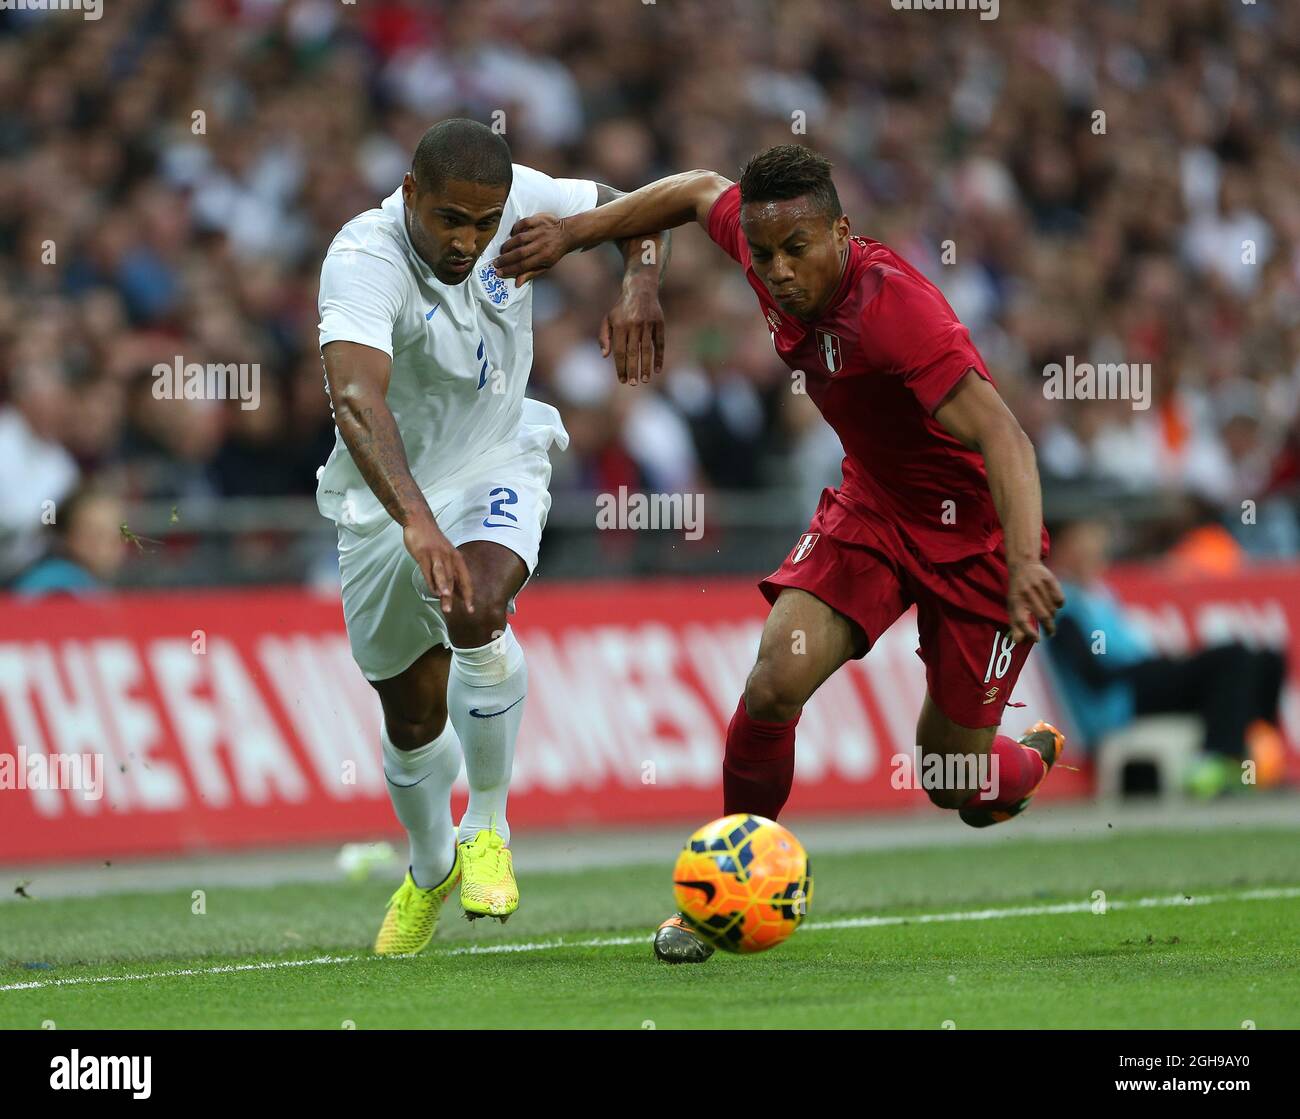 England's Glen Johnson tussles with Peru's Andre Carrillo during the international friendly match between England and Peru at Wembley Stadium on May 30, 2014 in London, England. Pic Charlie Forgham-Bailey/Sportimage. Stock Photo